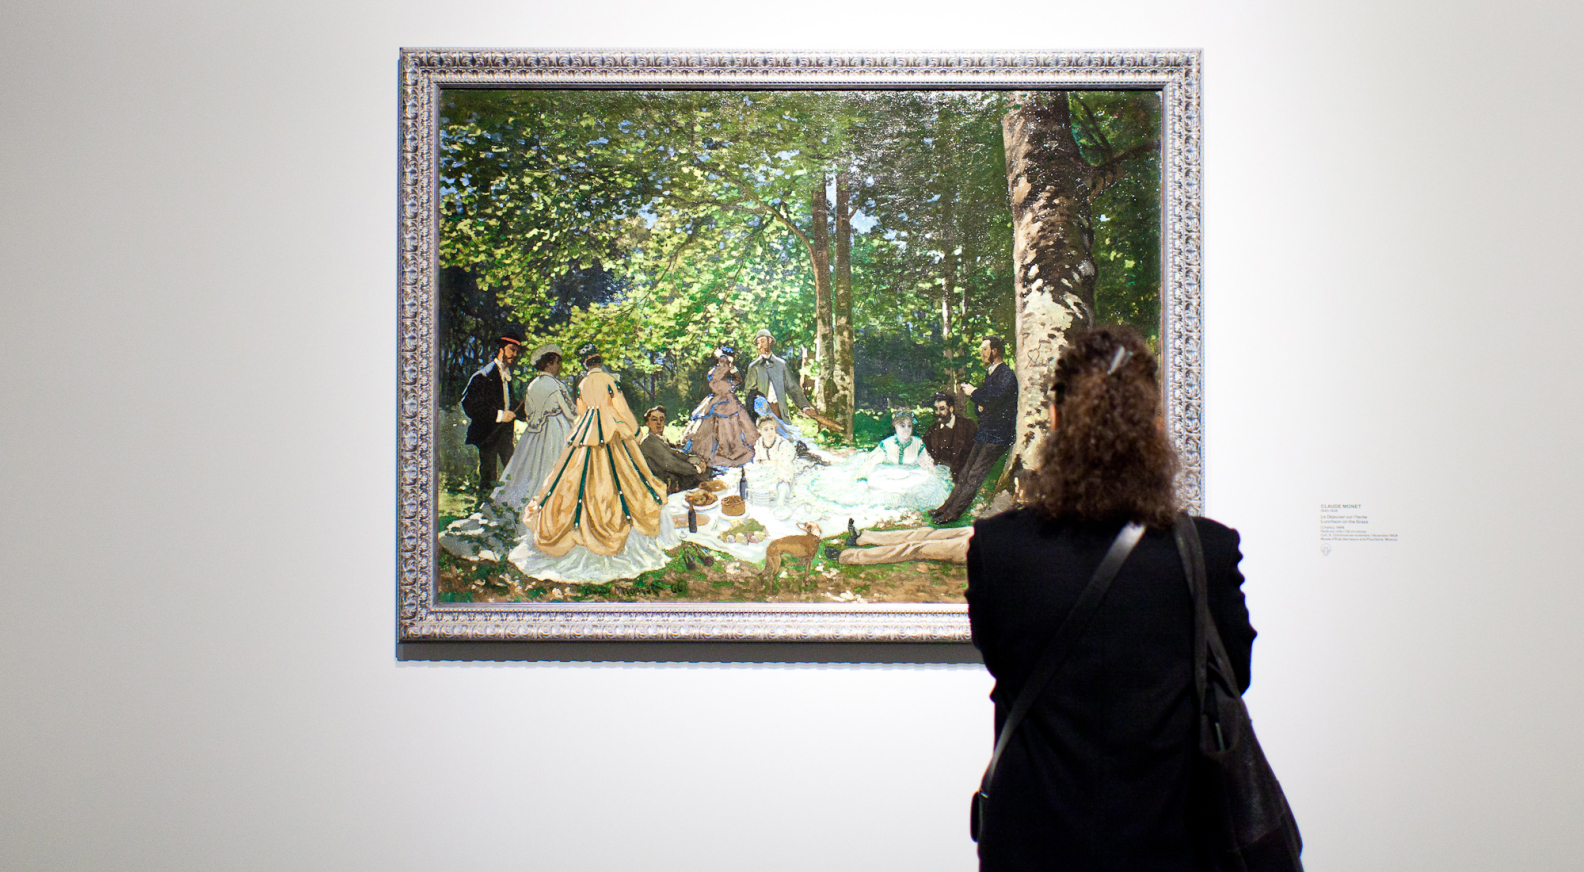 THE SHCHUKIN COLLECTION AT THE FONDATION LOUIS VUITTON - News